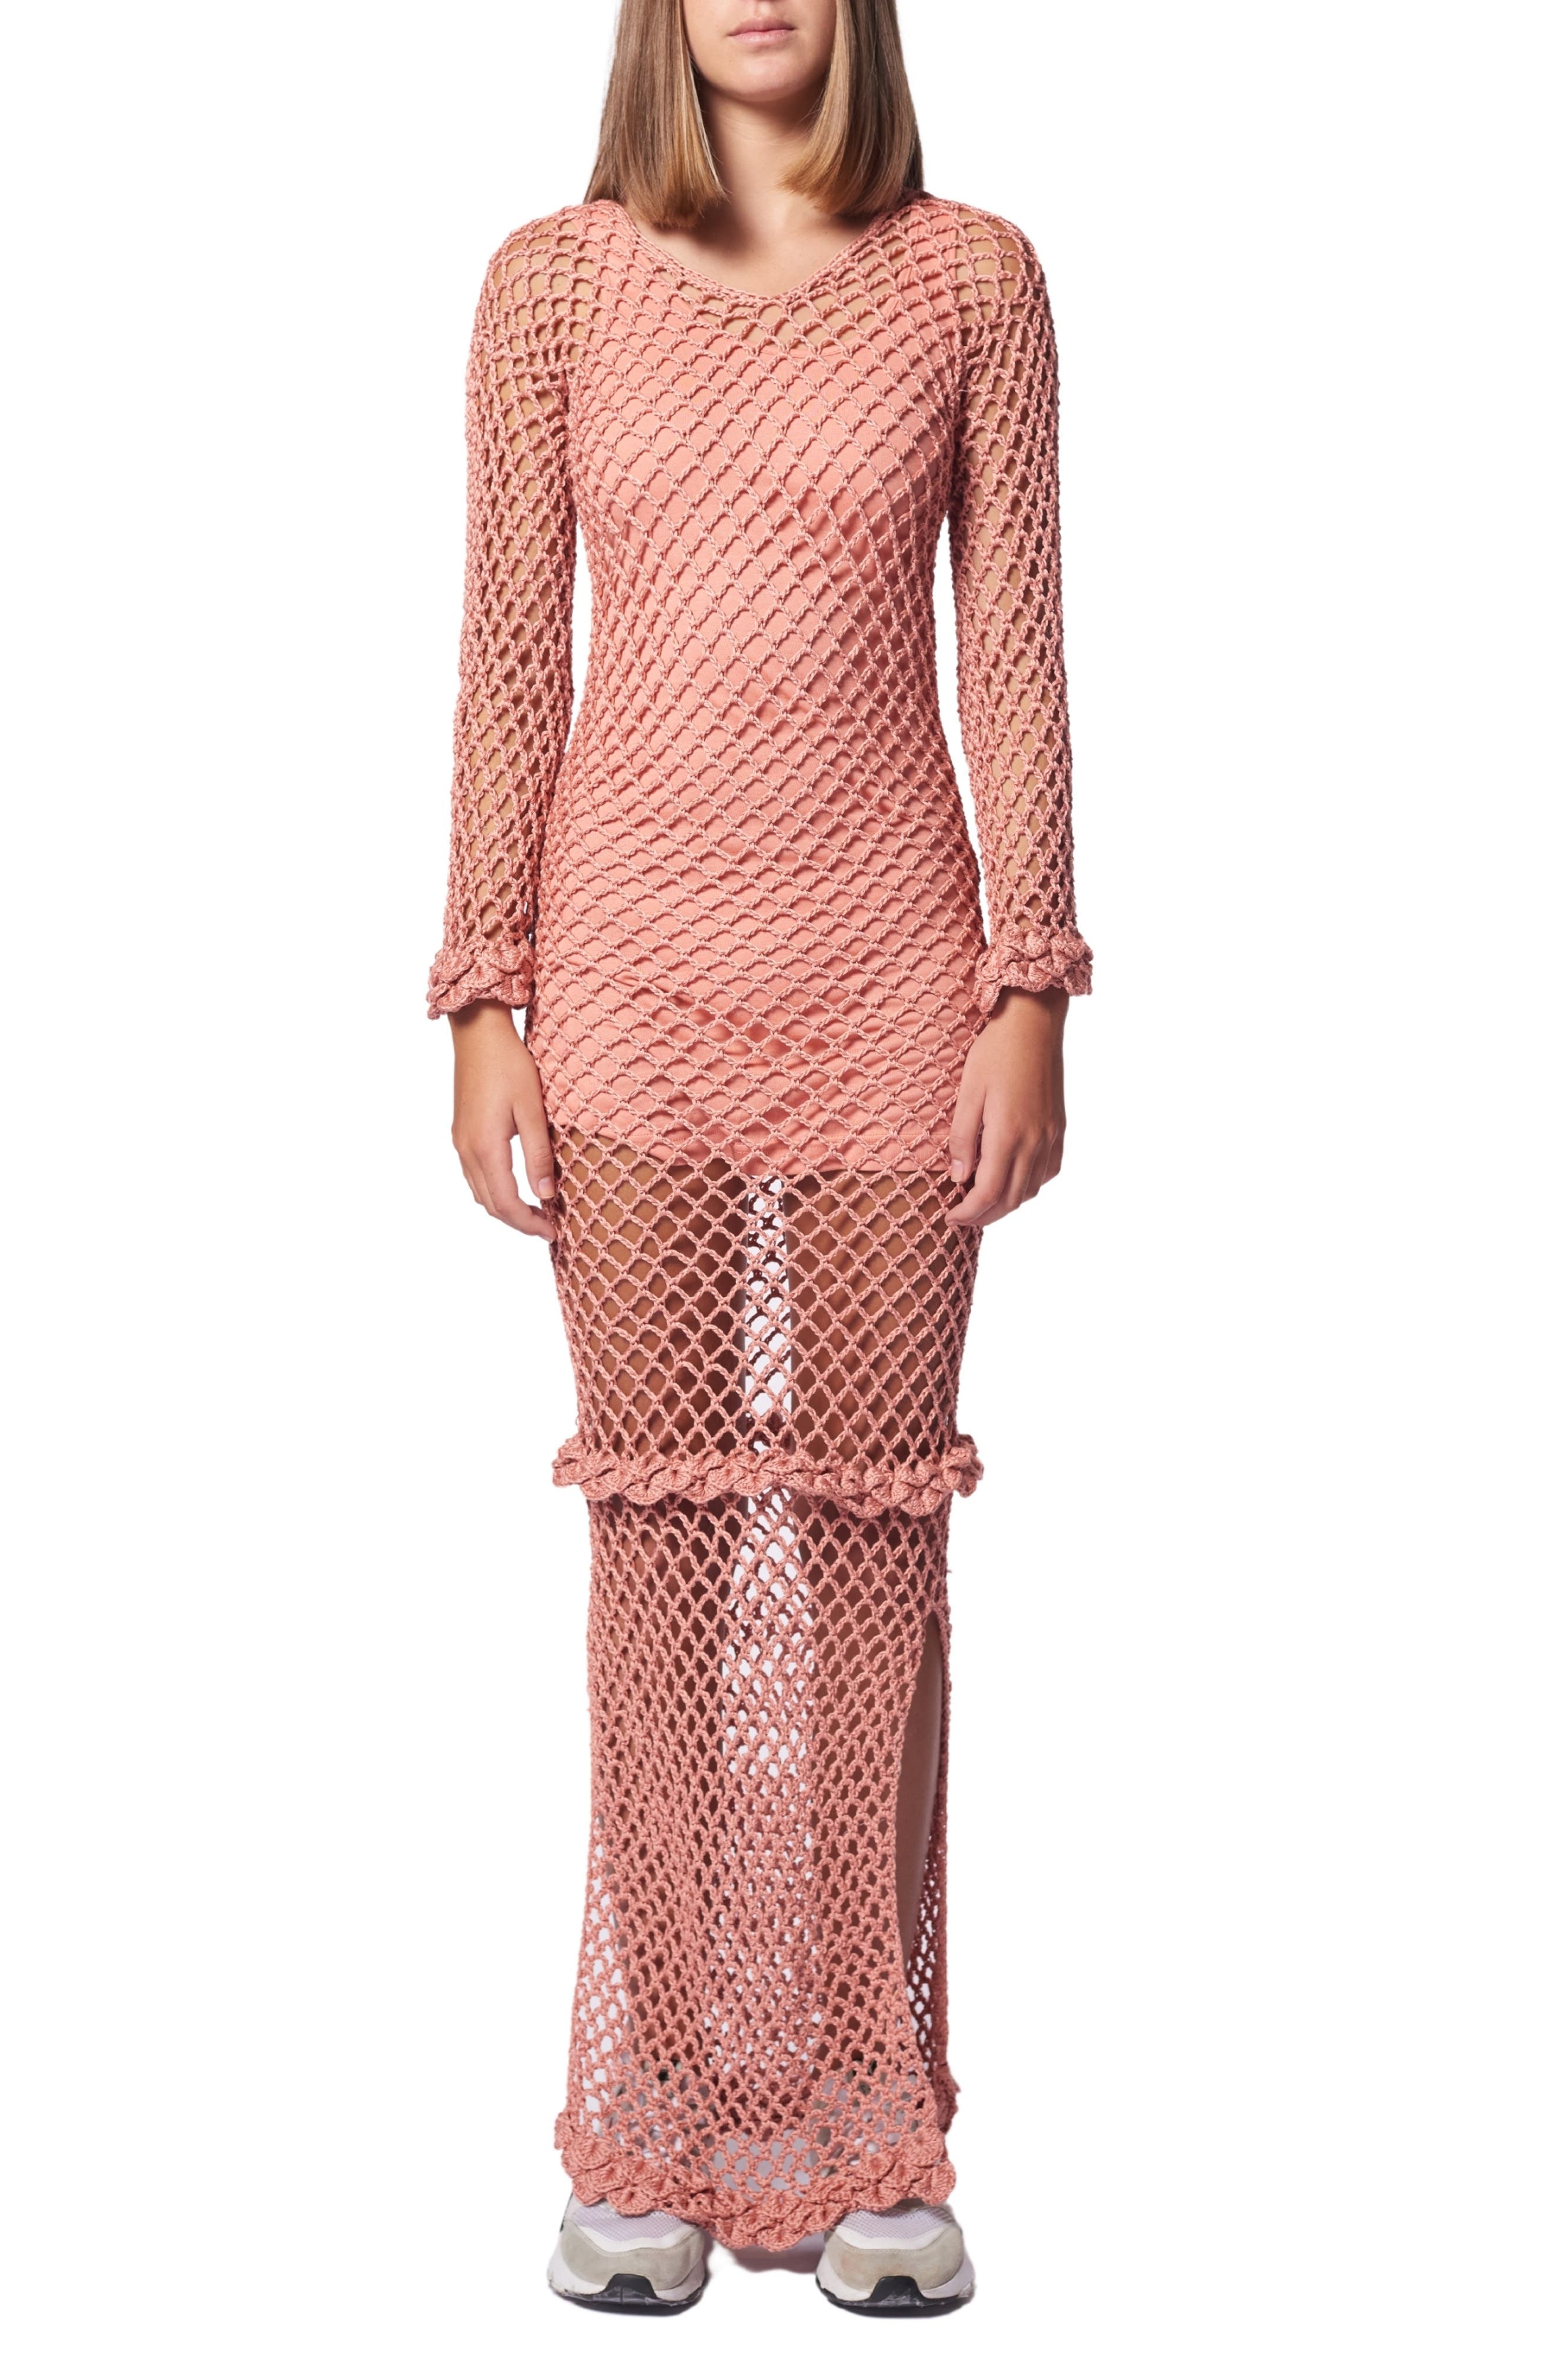 AYNI Crochet Long Sleeve Dress in Coral at Nordstrom